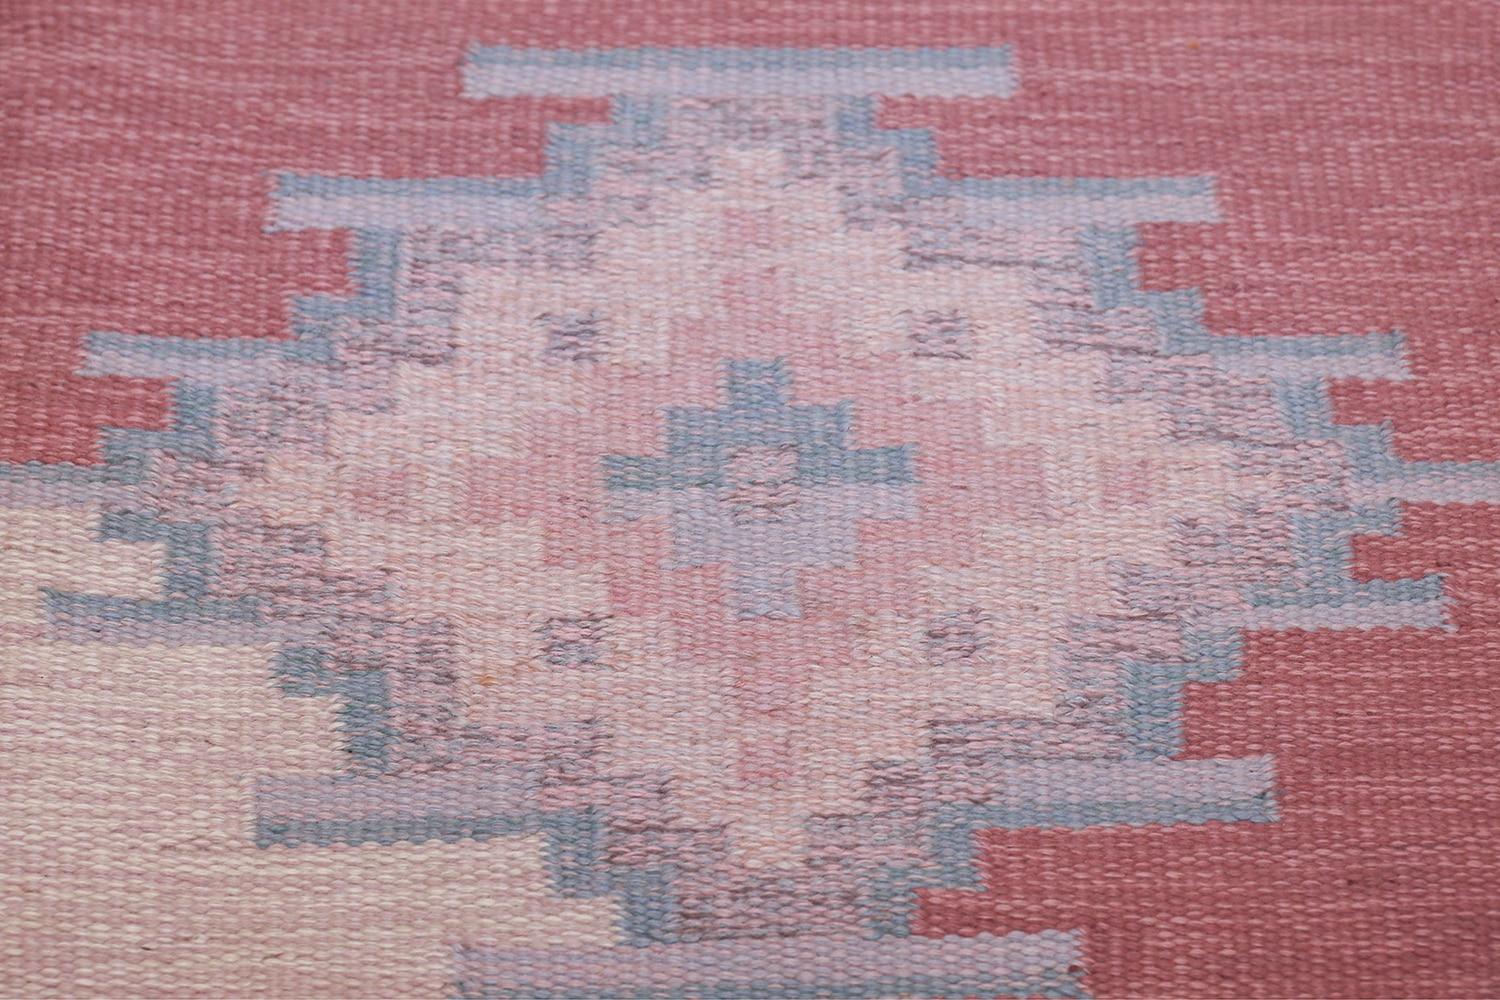 Wool Vintage Swedish Flat-Woven Kilim. Size: 4 ft 5 in x 6 ft 8 in (1.35 m x 2.03 m)